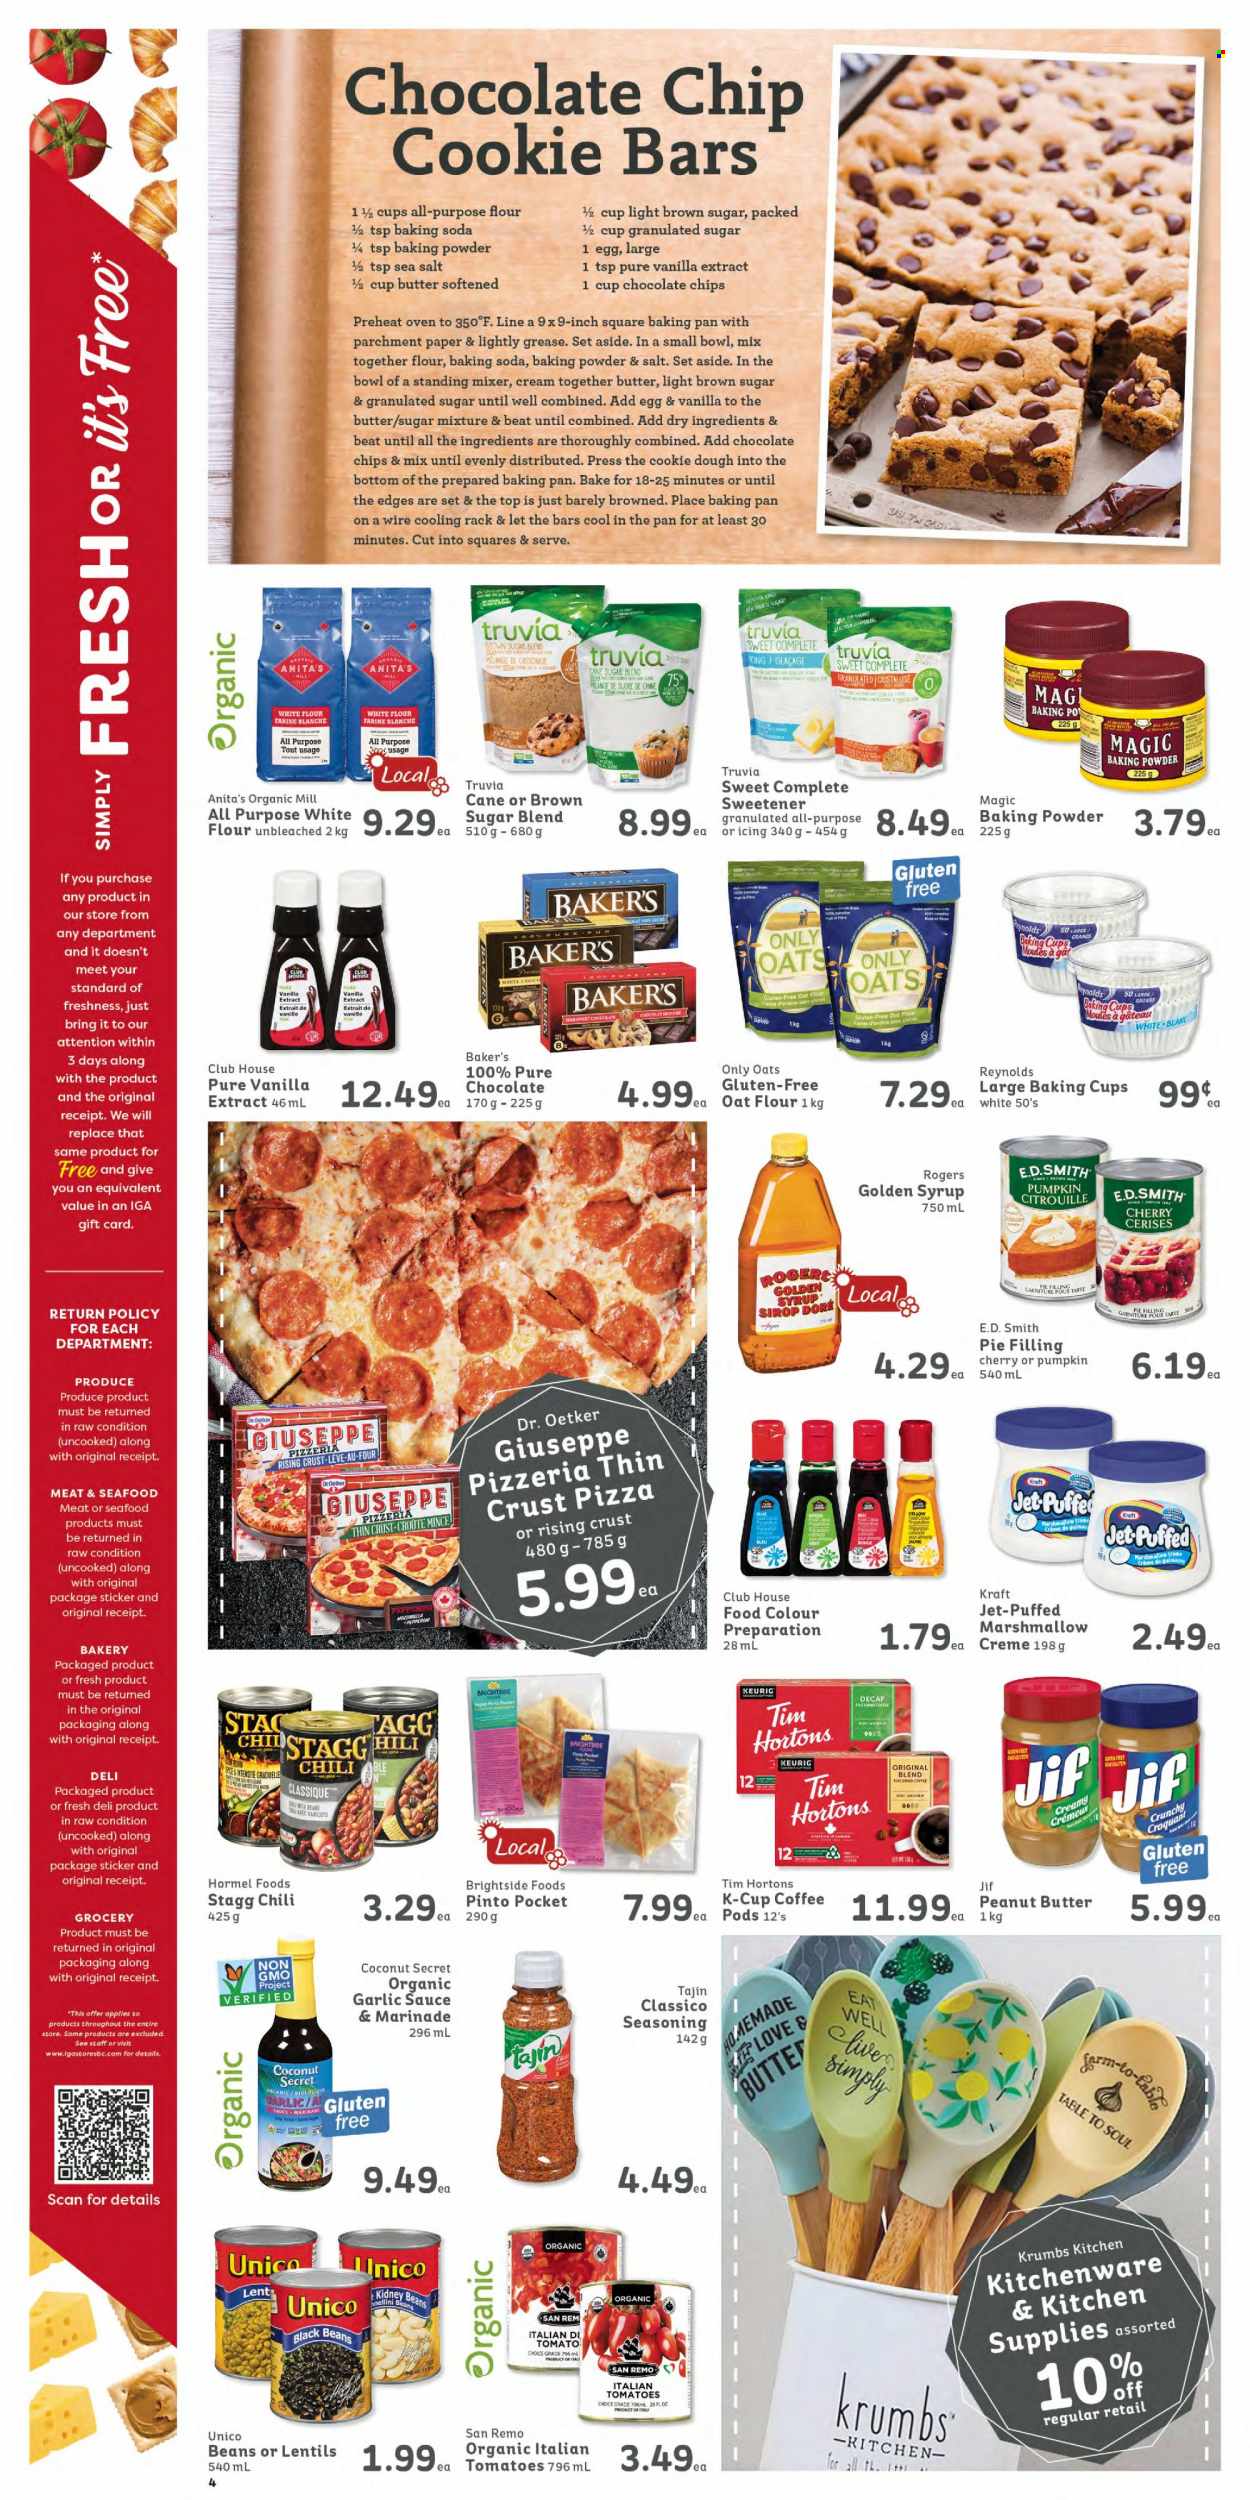 thumbnail - IGA Simple Goodness Flyer - December 02, 2022 - December 08, 2022 - Sales products - cherries, coconut, seafood, pizza, Kraft®, Hormel, pepperoni, Dr. Oetker, eggs, cookie dough, marshmallows, bicarbonate of soda, flour, granulated sugar, pie filling, oats, vanilla extract, sweetener, black beans, lentils, spice, marinade, garlic sauce, Classico, peanut butter, syrup, Jif, coffee, coffee capsules, K-Cups, Keurig. Page 4.